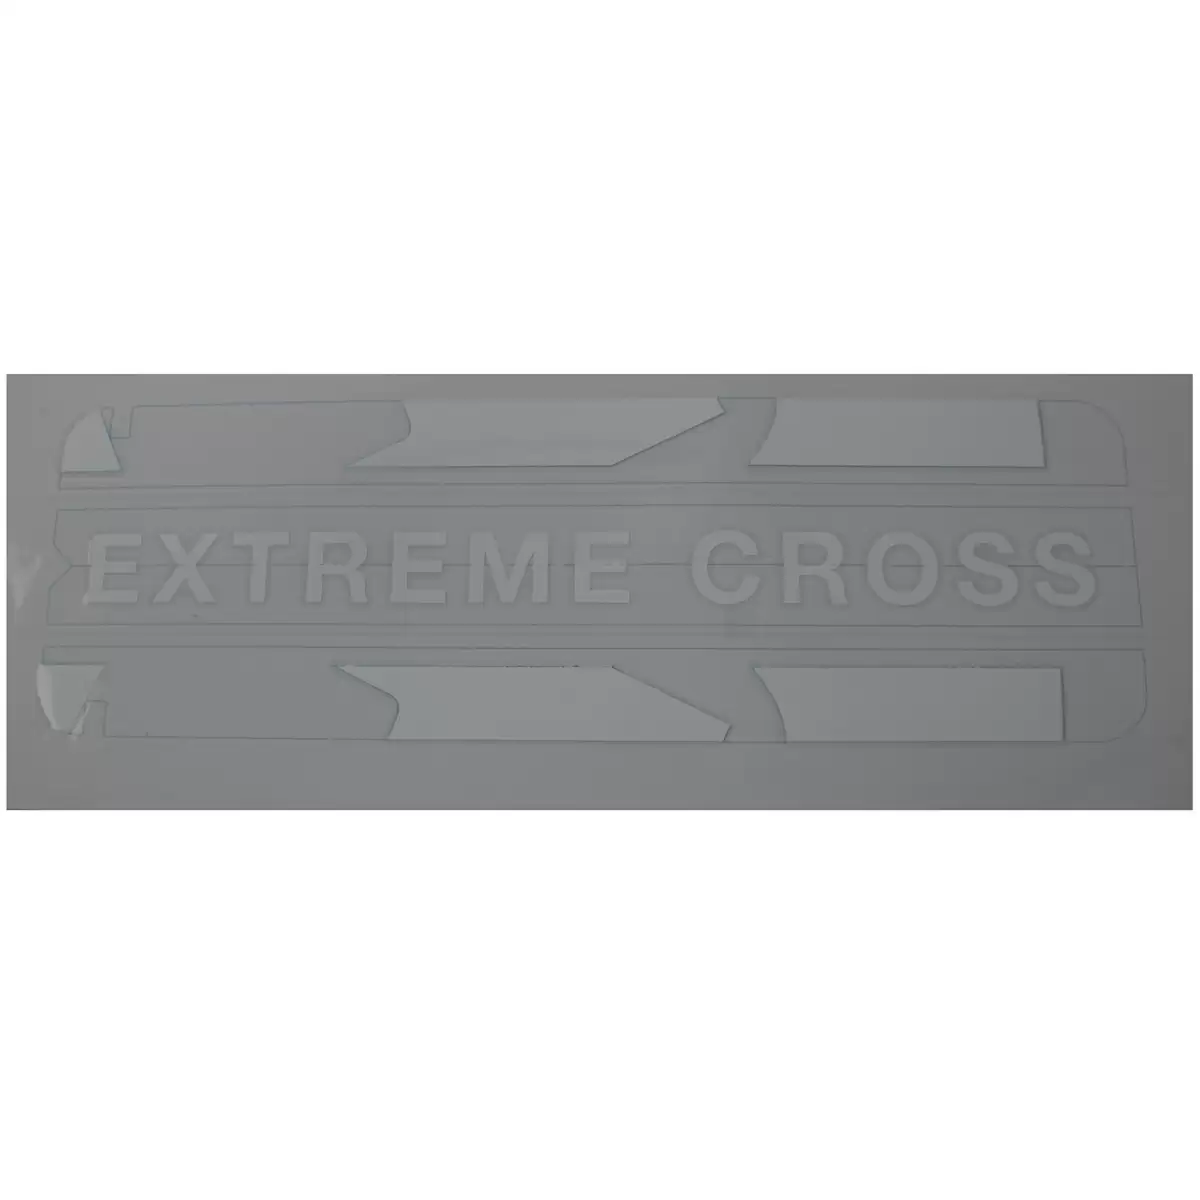 Battery cover sticker Extreme Cross white - image